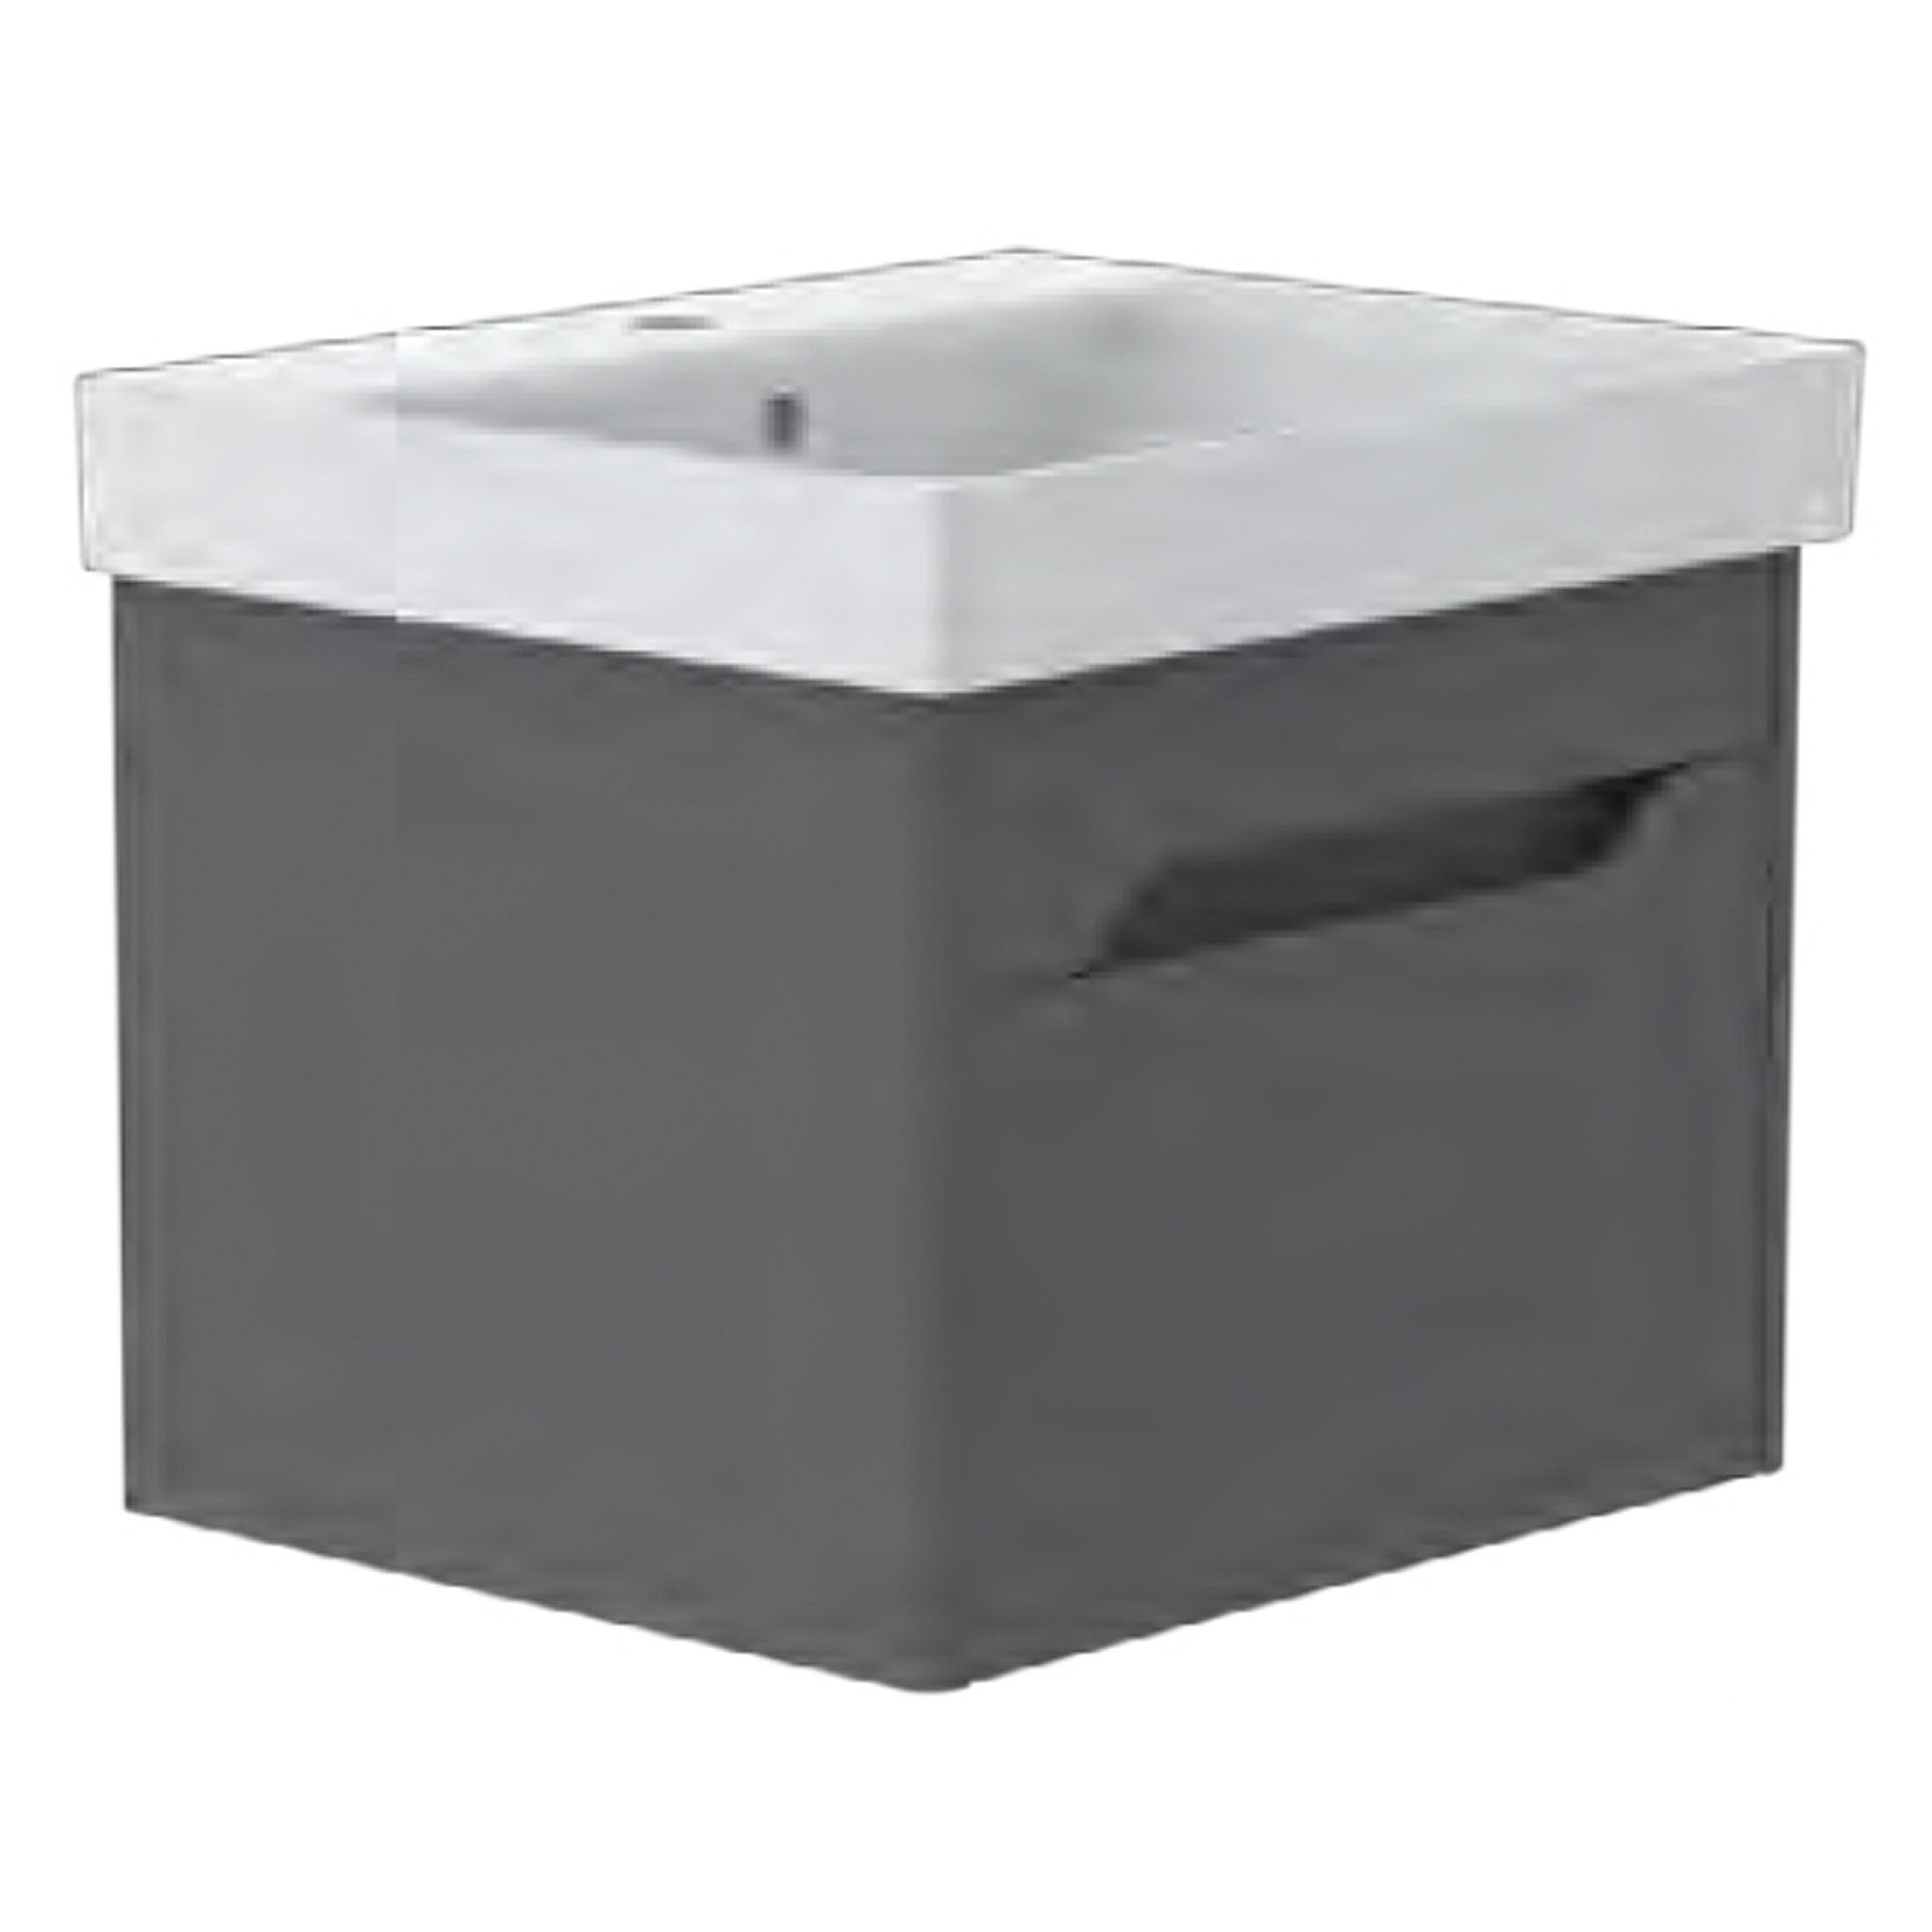 GSI Nubes Lacquer 60 x 50 1 Drawer Vanity Unit